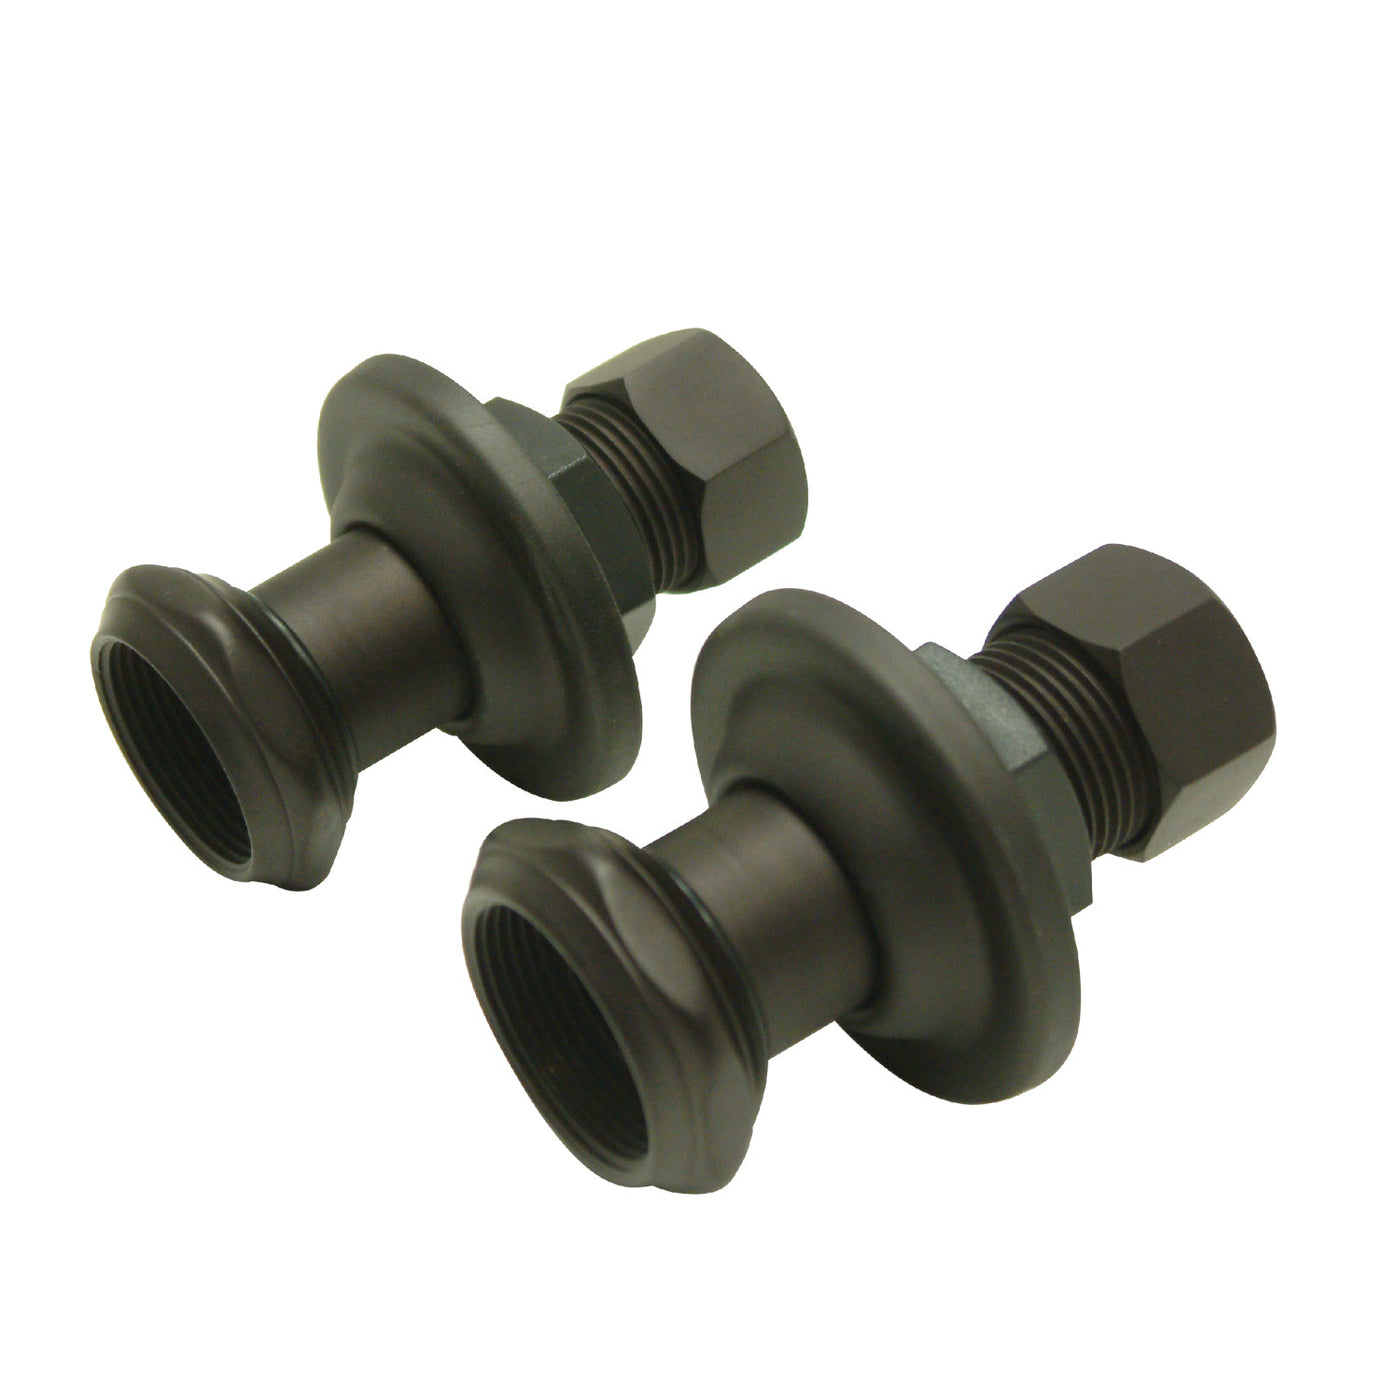 Elements of Design DSU4105 Wall Union Extension, 1-3/4 inch, Oil Rubbed Bronze